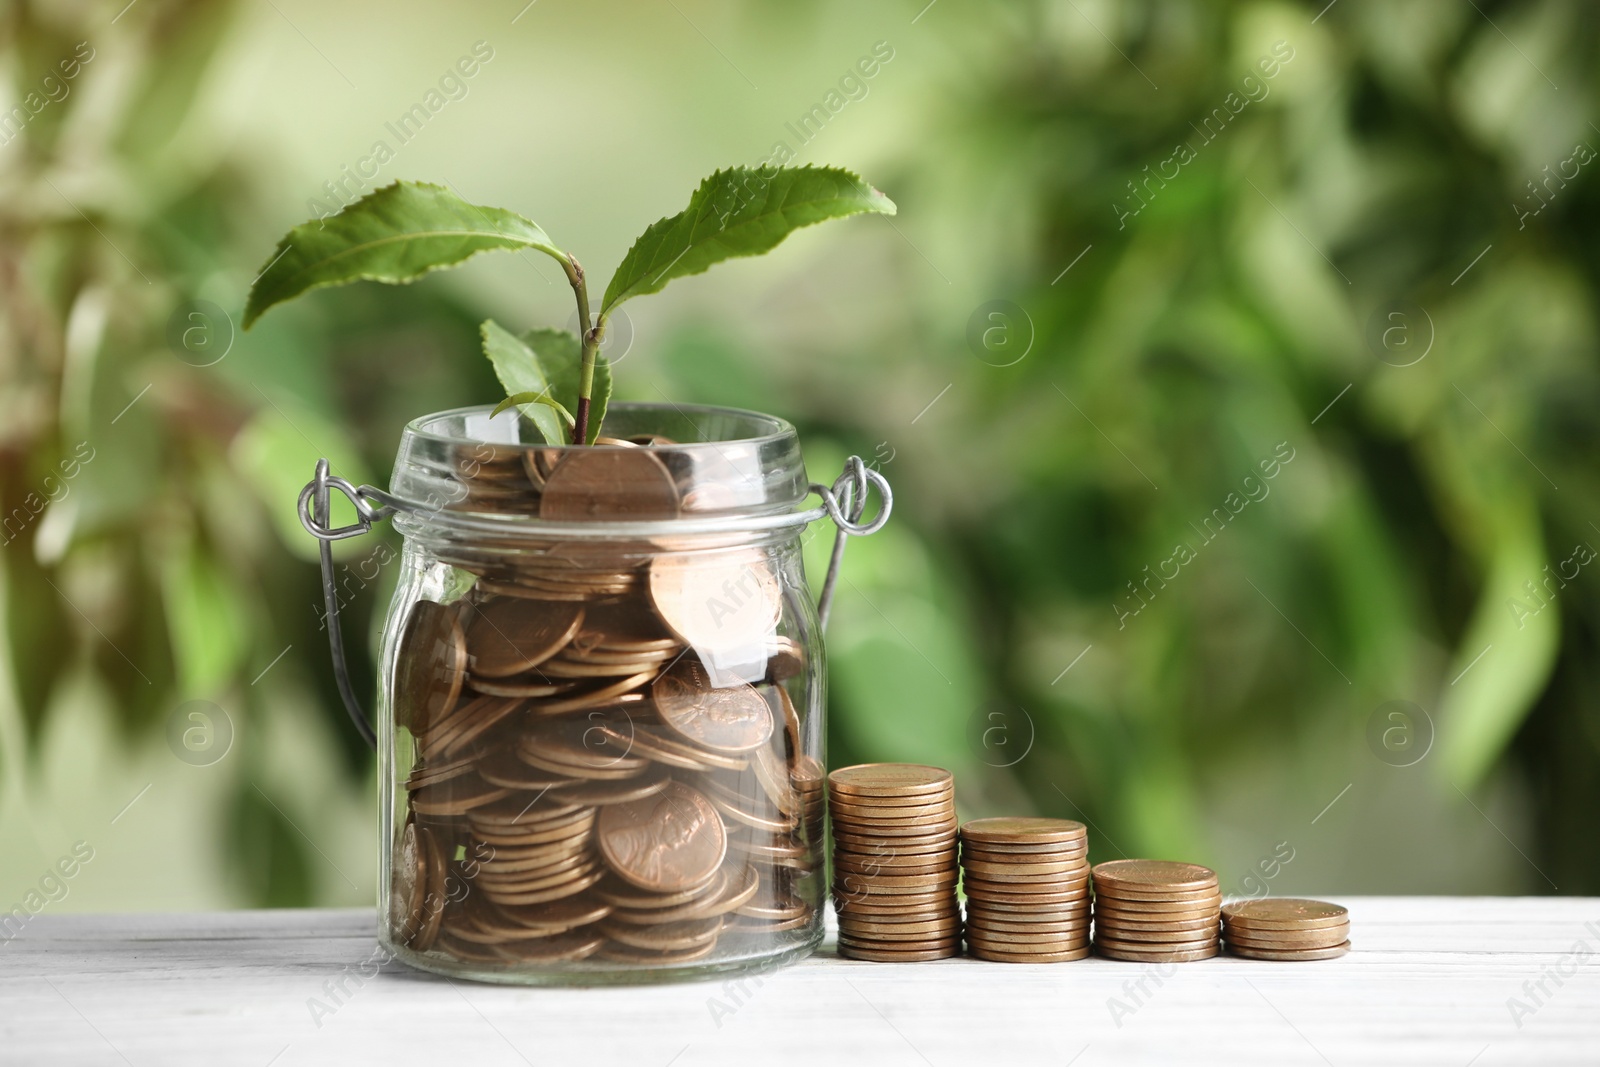 Photo of Coins and green sprout on white wooden table against blurred background. Money savings